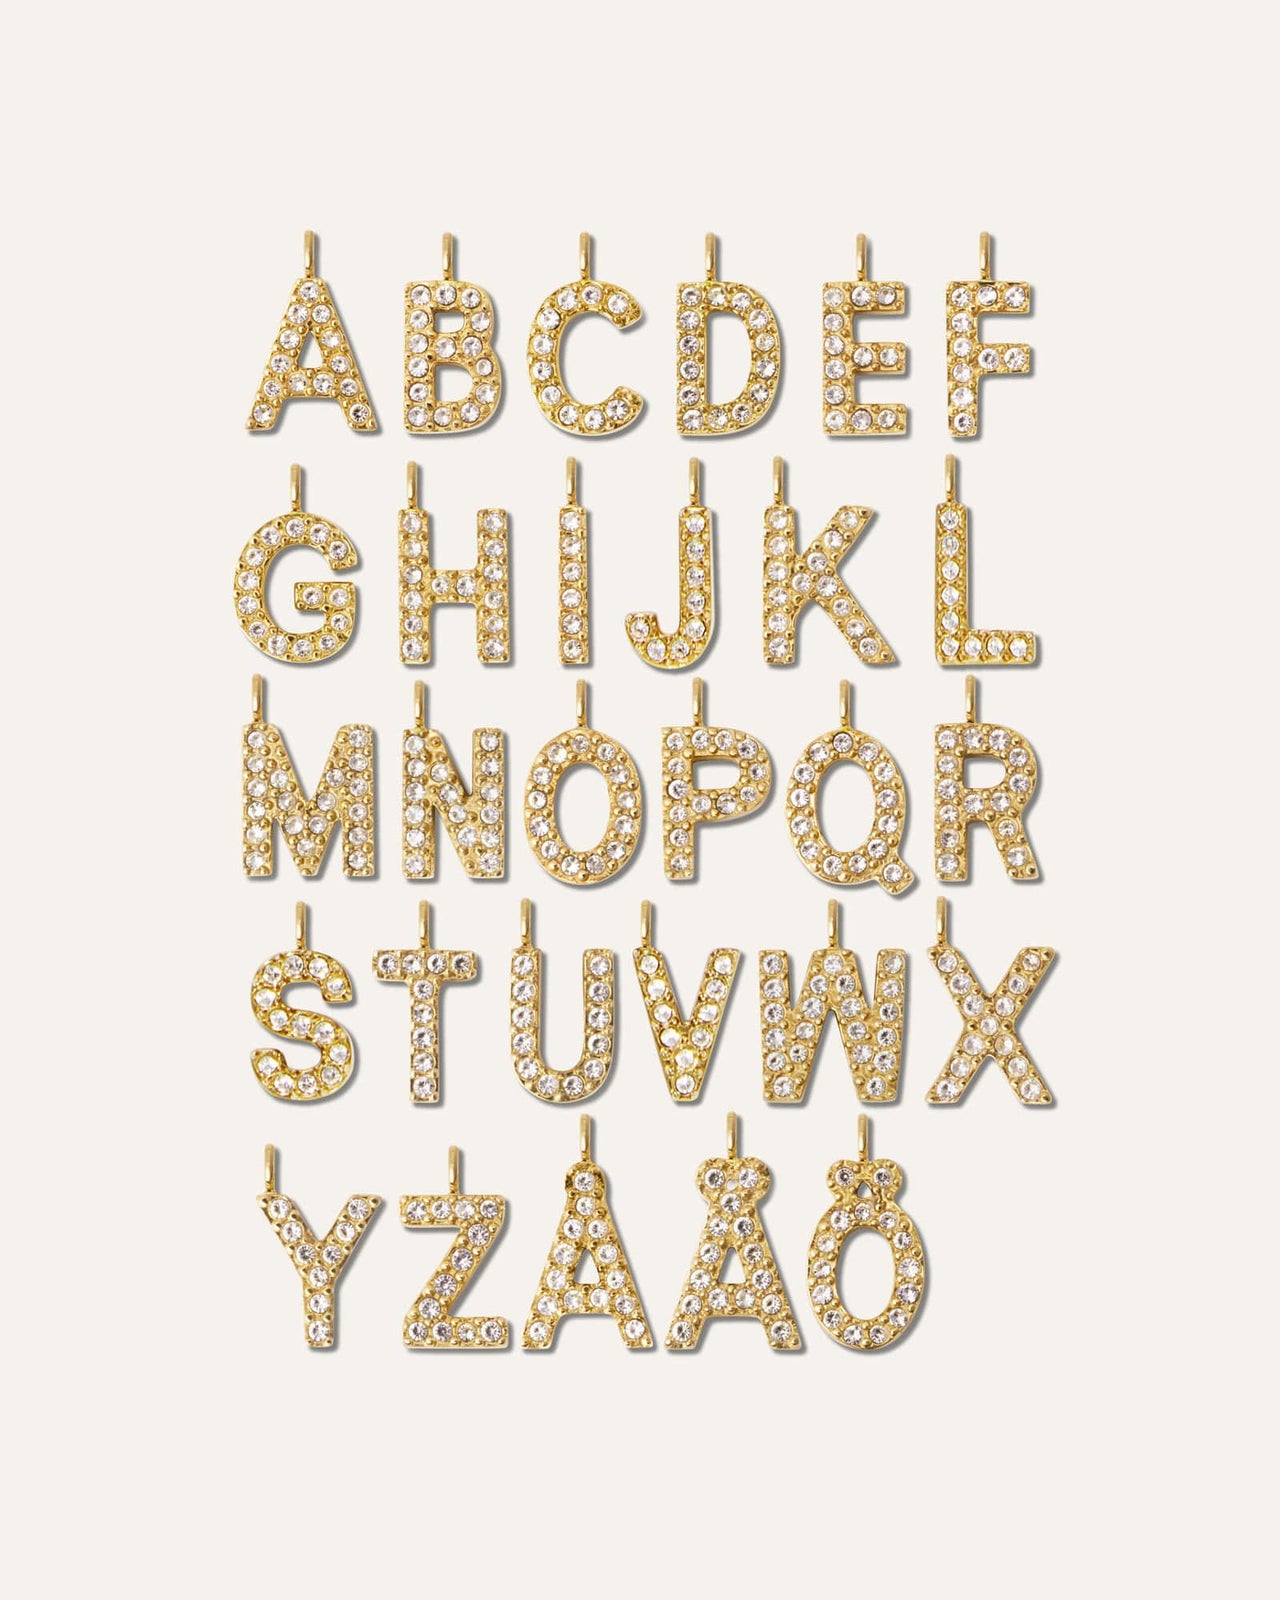 Petite Stone Letter Gold Necklace